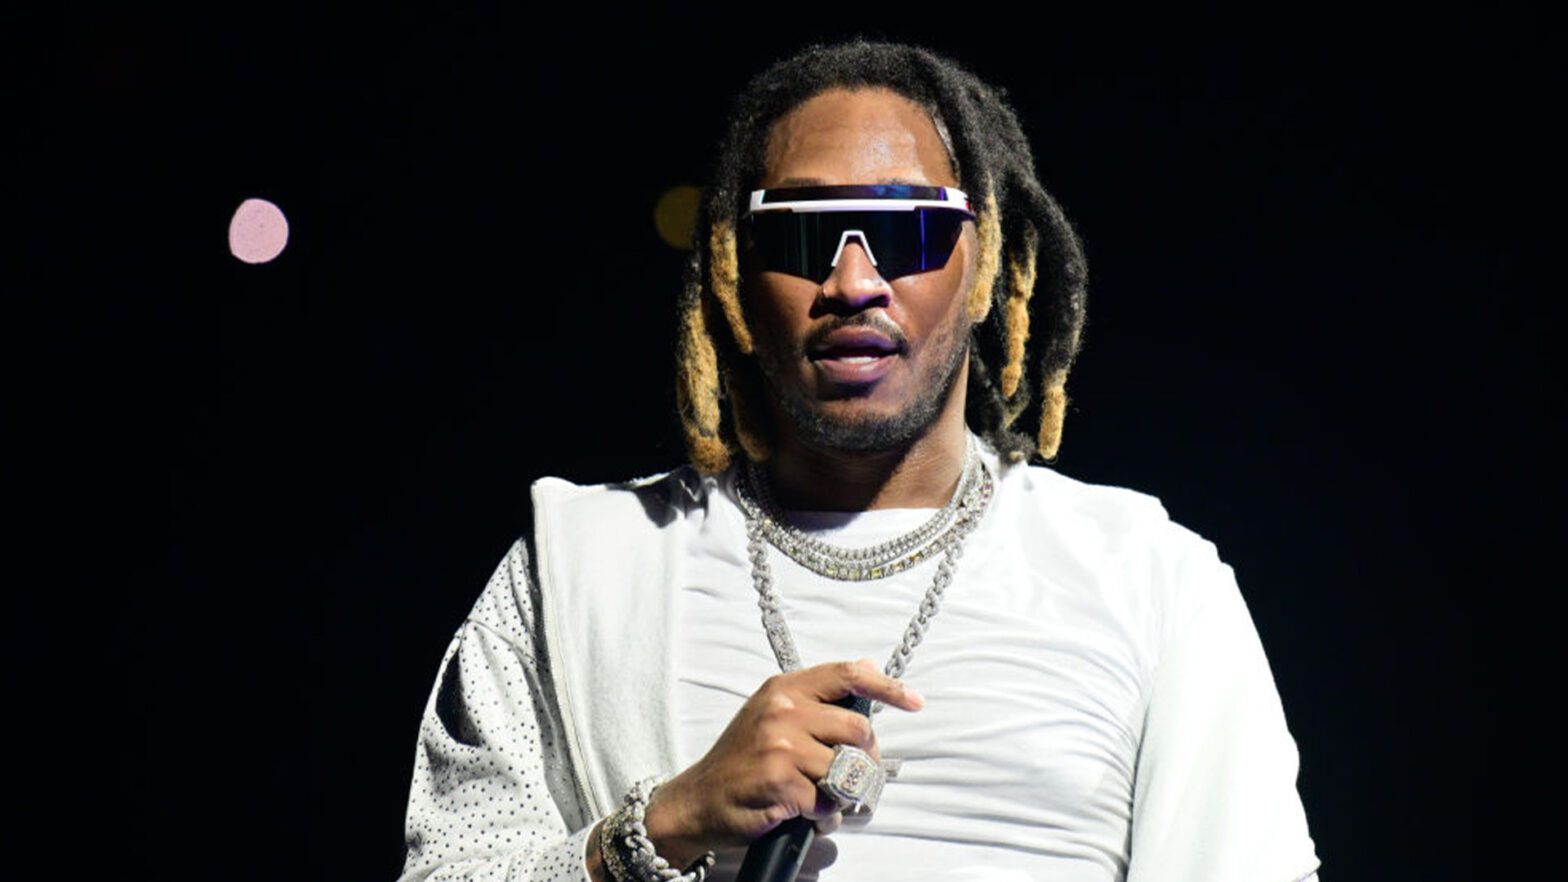 Future Is Set To Expand His Empire With The Official Release Of His Cannabis Line Evol